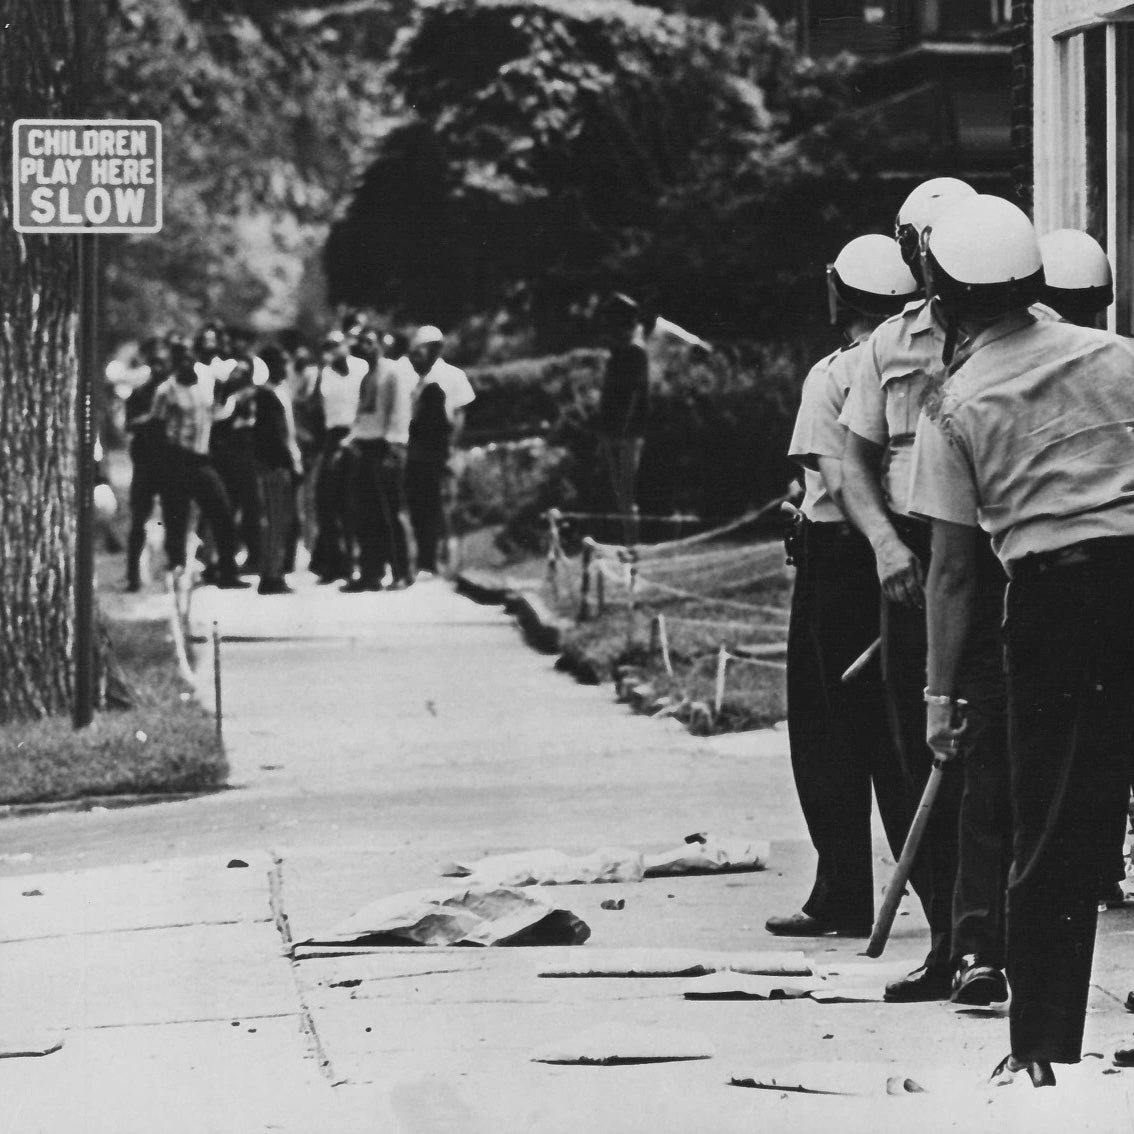 Detroit Under Fire: Police Violence, Crime Politics, and the Struggle for Racial Justice in the Civil Rights Era